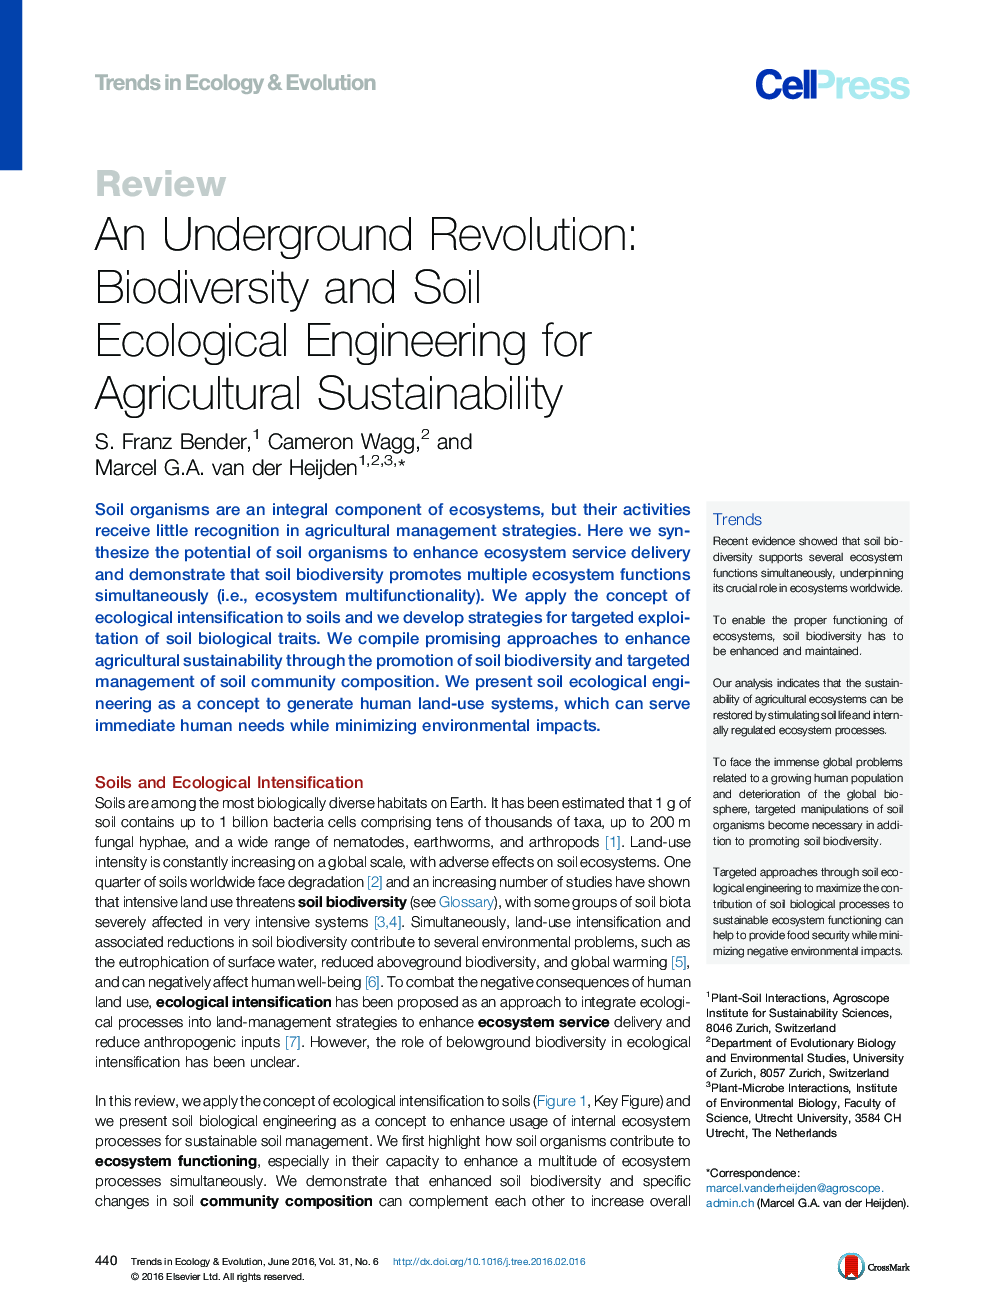 An Underground Revolution: Biodiversity and Soil Ecological Engineering for Agricultural Sustainability